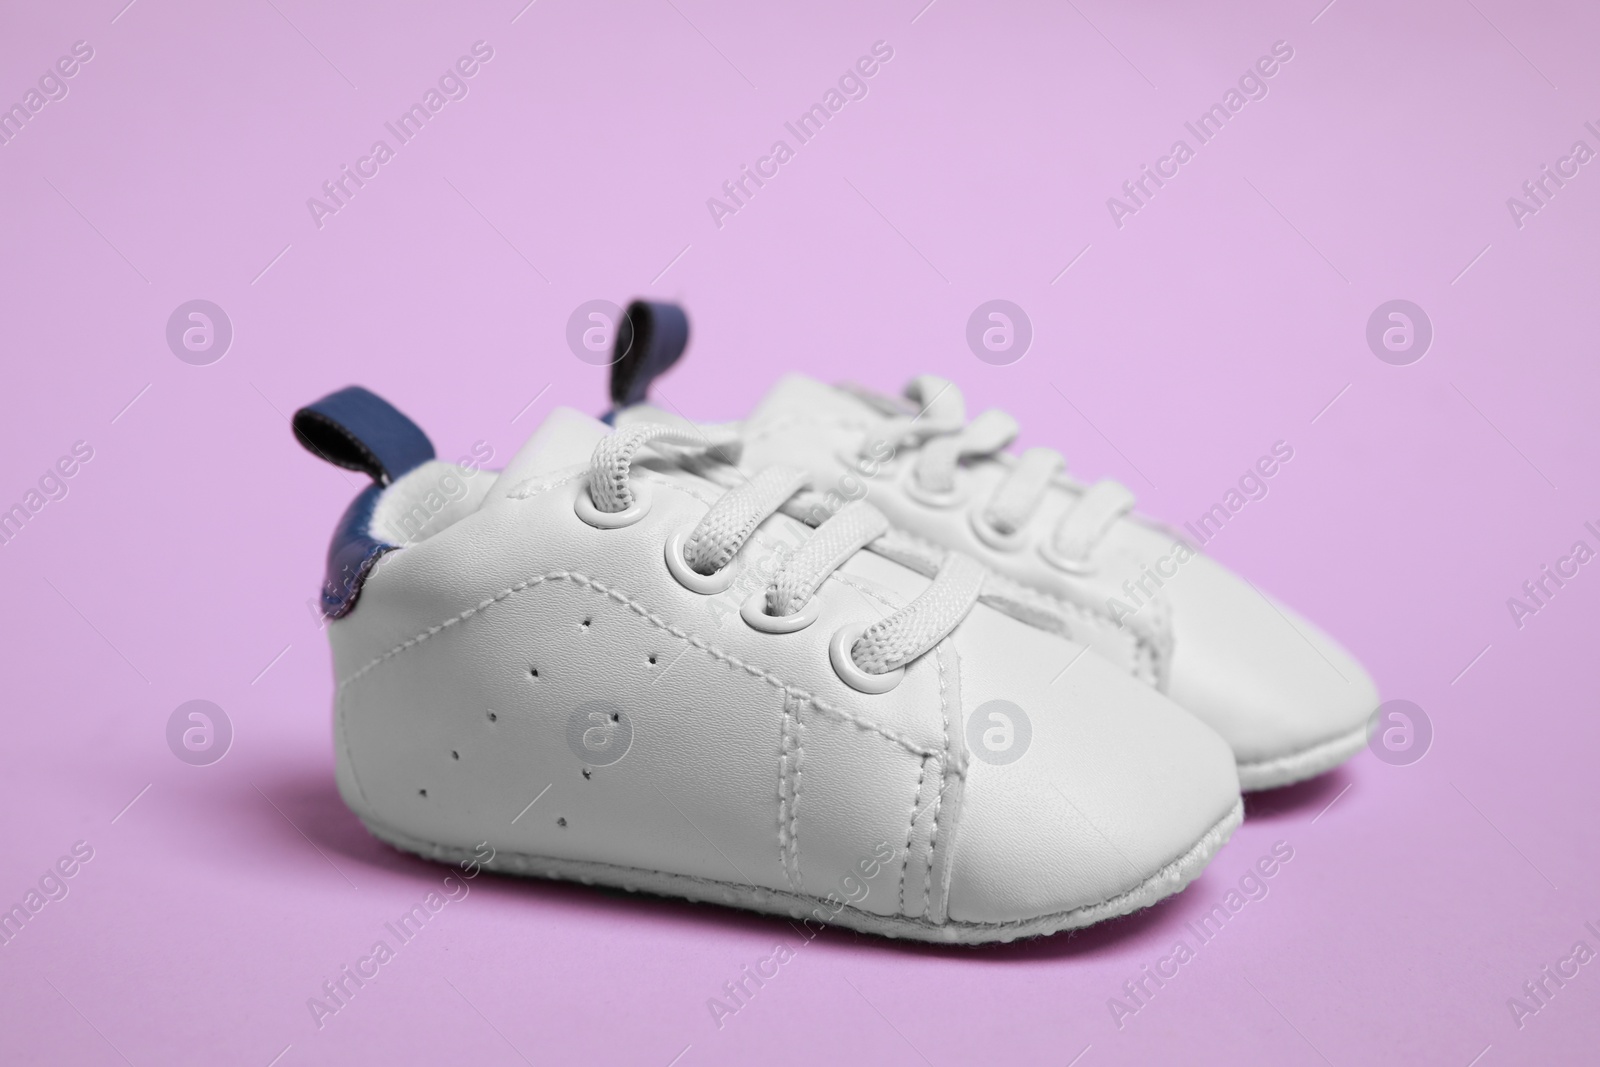 Photo of Pair of cute baby shoes on violet background